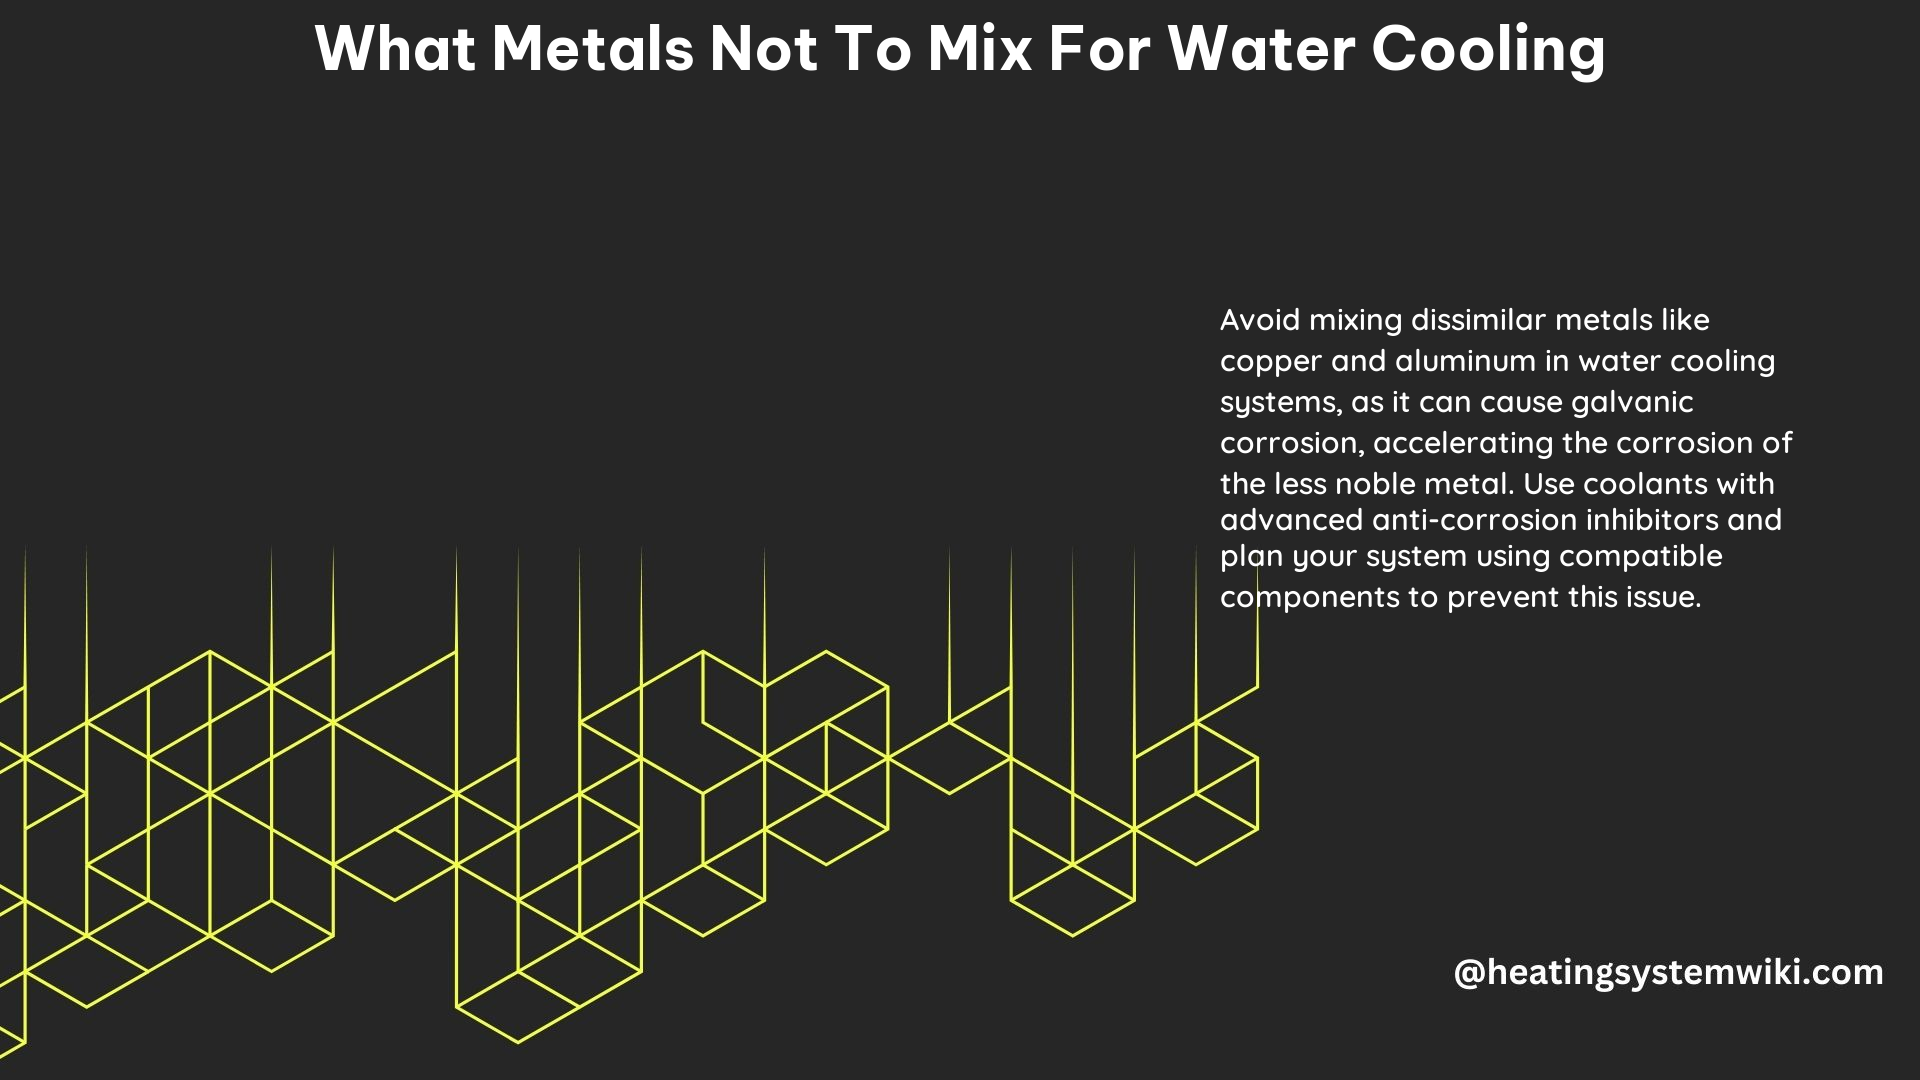 What Metals Not to Mix for Water Cooling